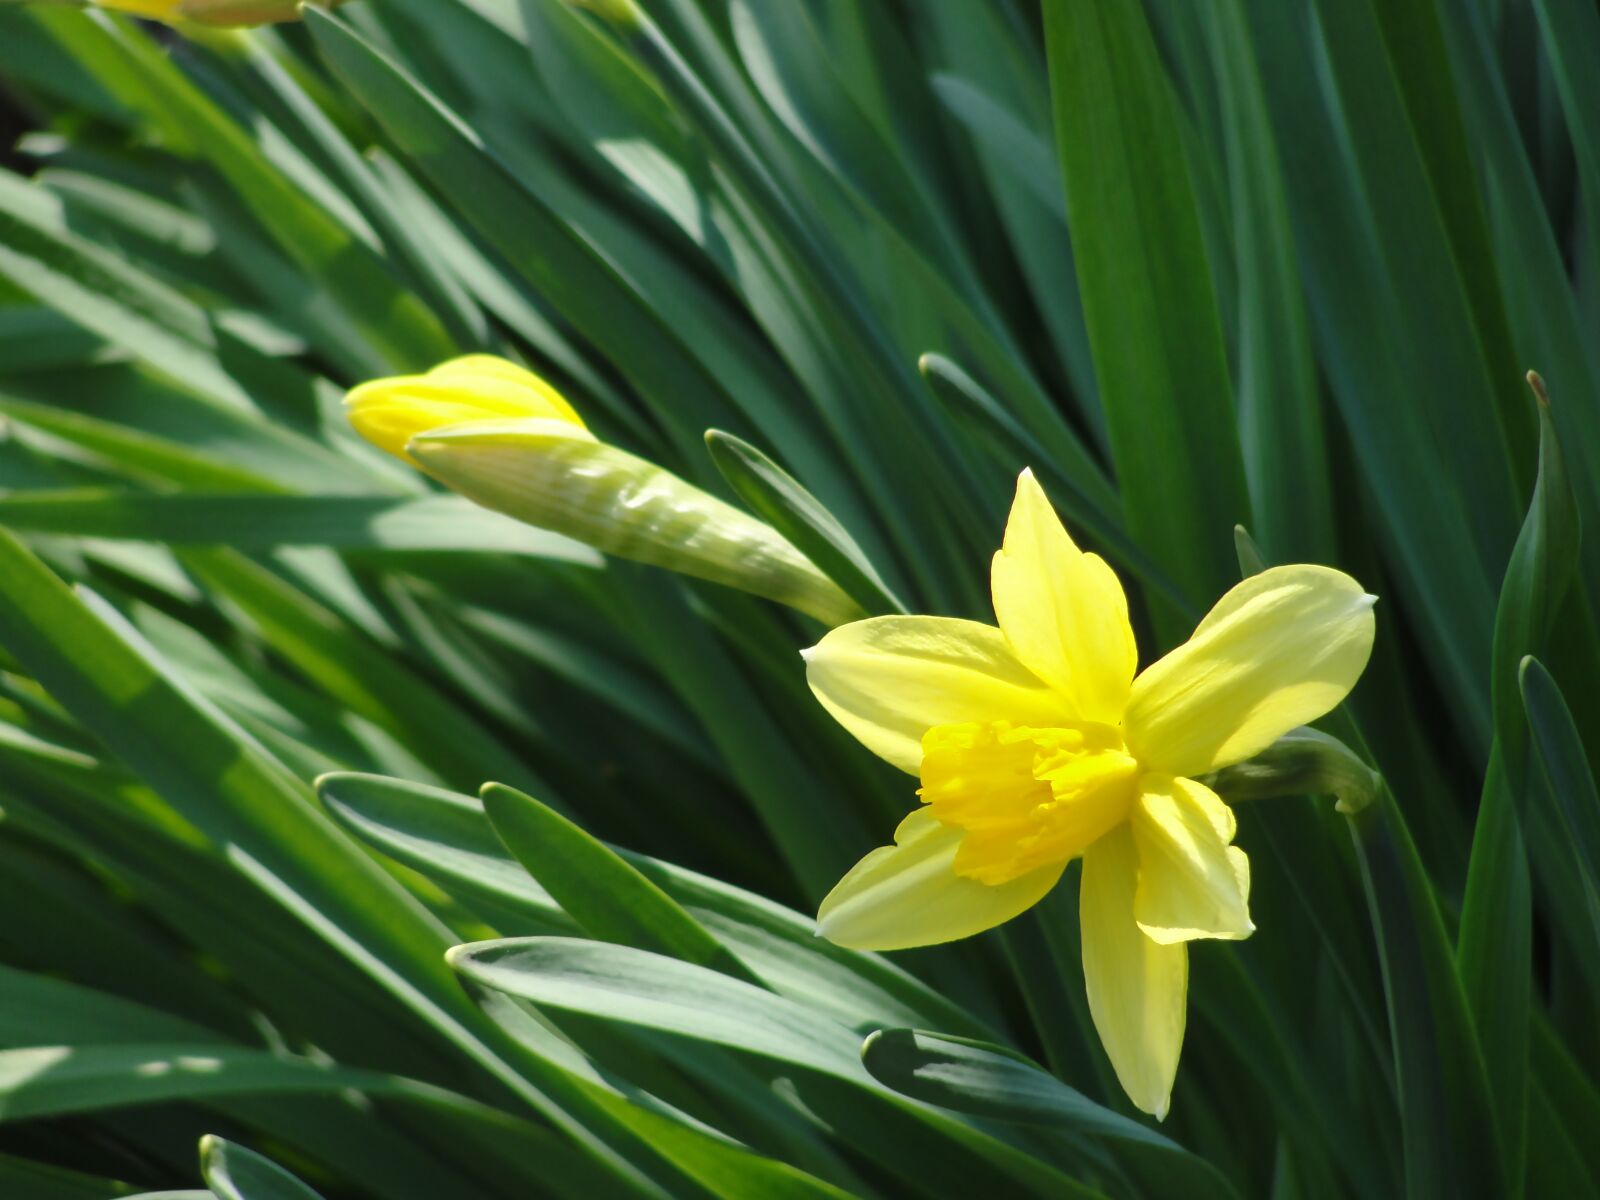 Sony Cyber-shot DSC-H20 sample photo. Narcissus, flower, spring photography